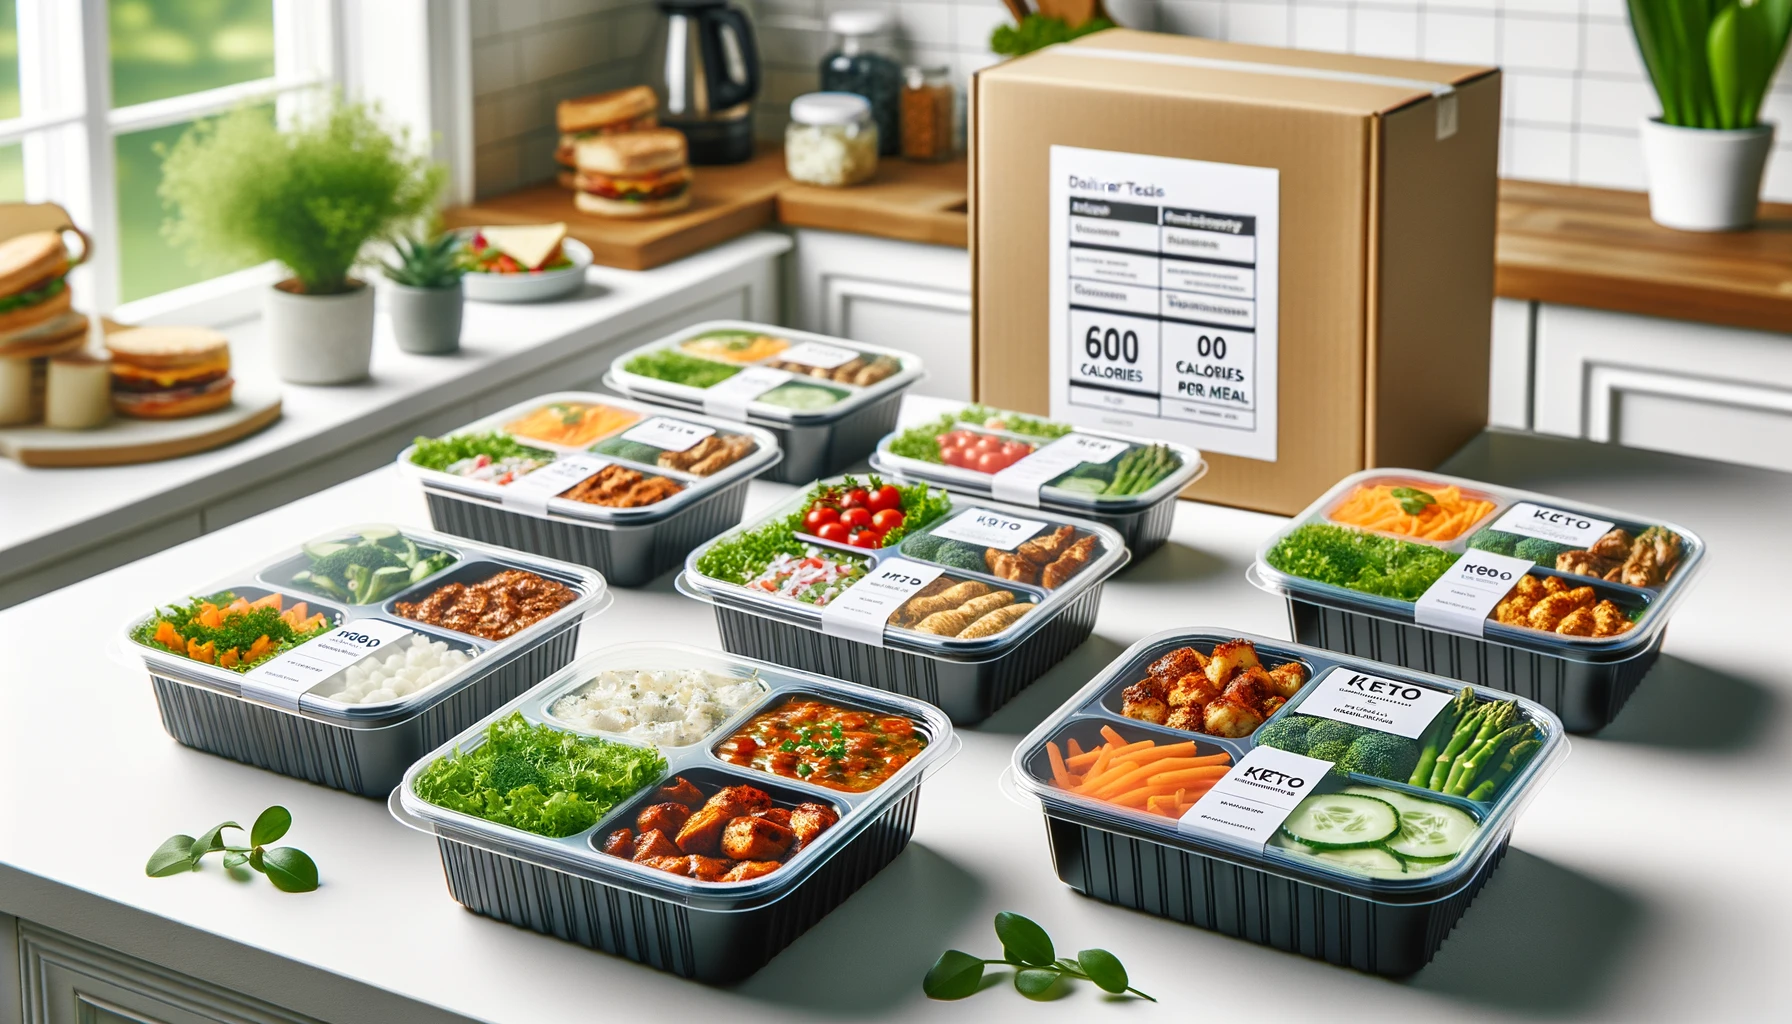 Variety of ready-made meals on a kitchen counter with clear dietary labels and a plain delivery box.